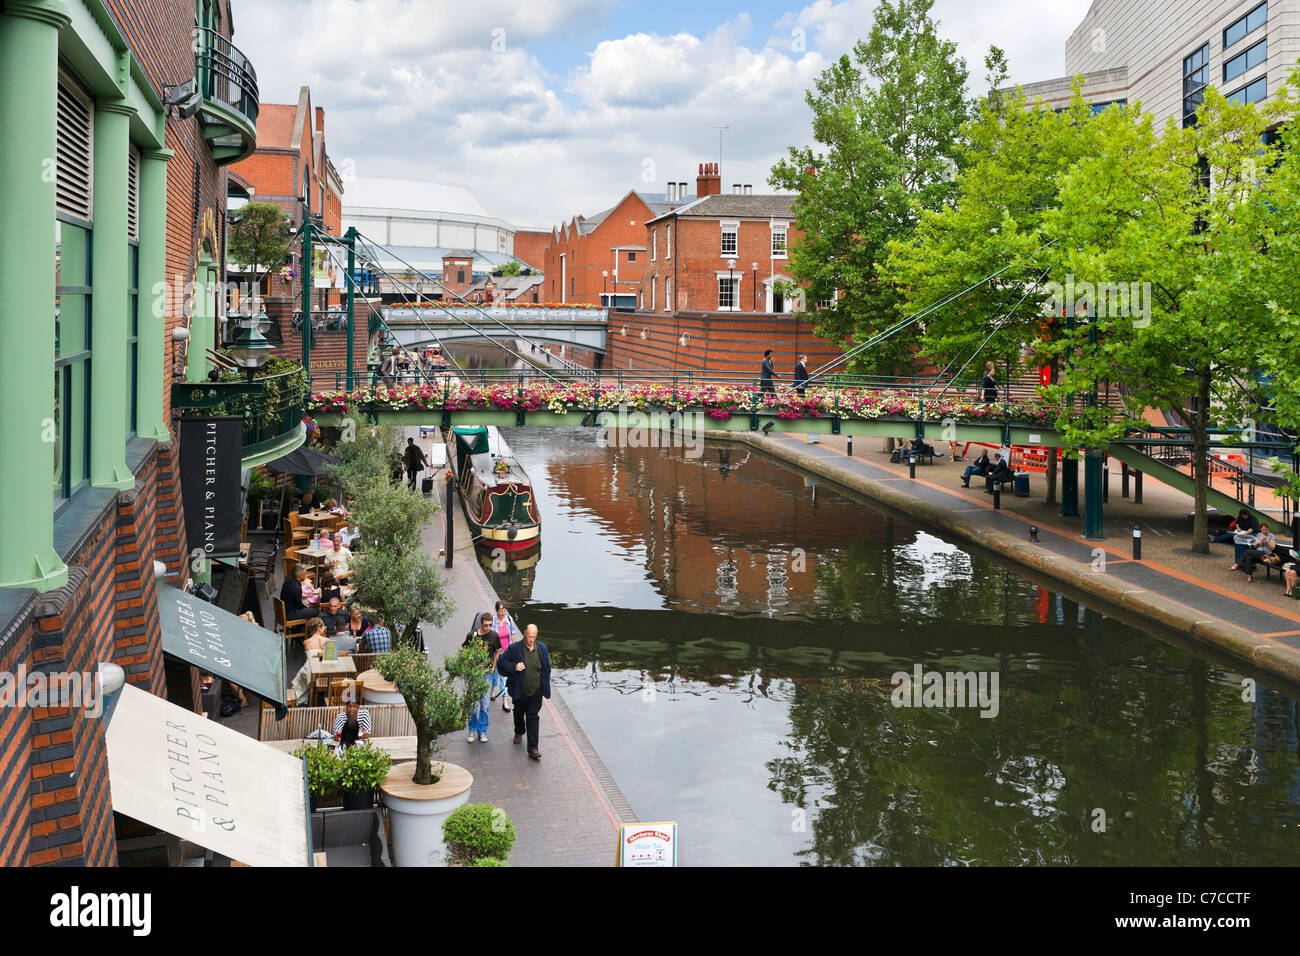 Narrowboats in front of restaurants on the canal at Brindley Place, Birmingham, West Midlands, England, UK Stock Photo